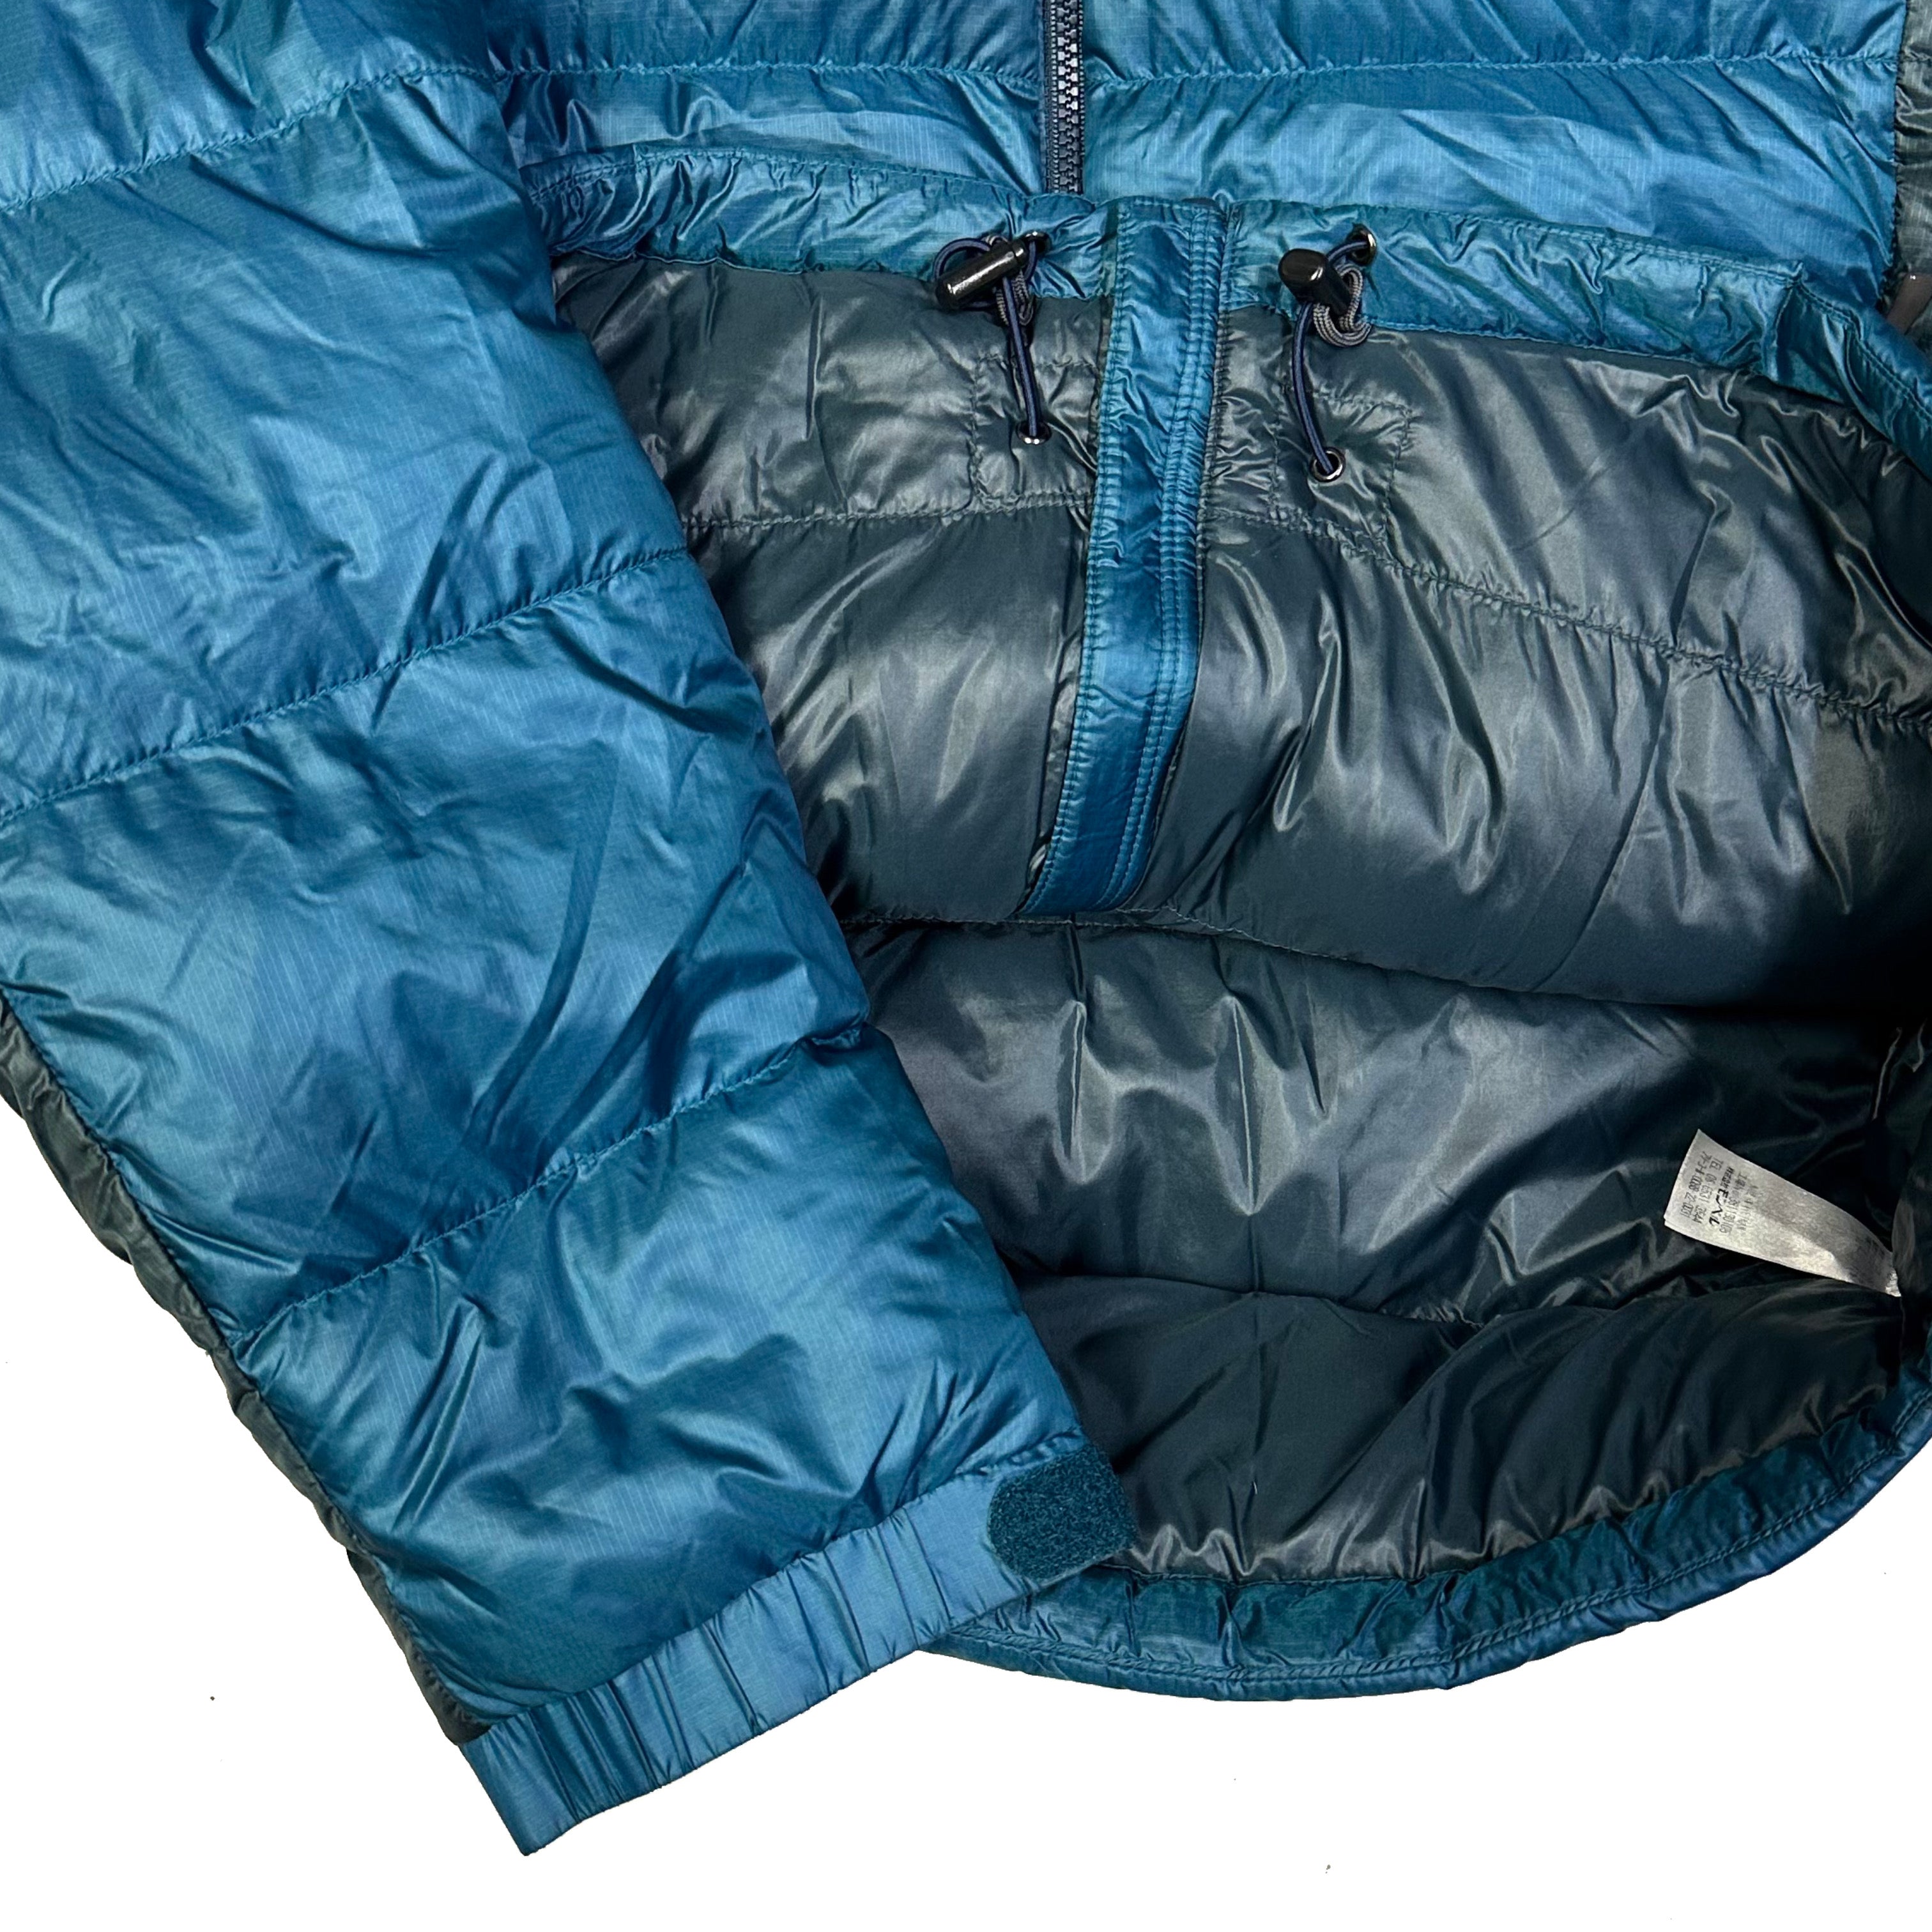 Montbell Two Tone Alpine Down Puffer Jacket In Blue ( M )